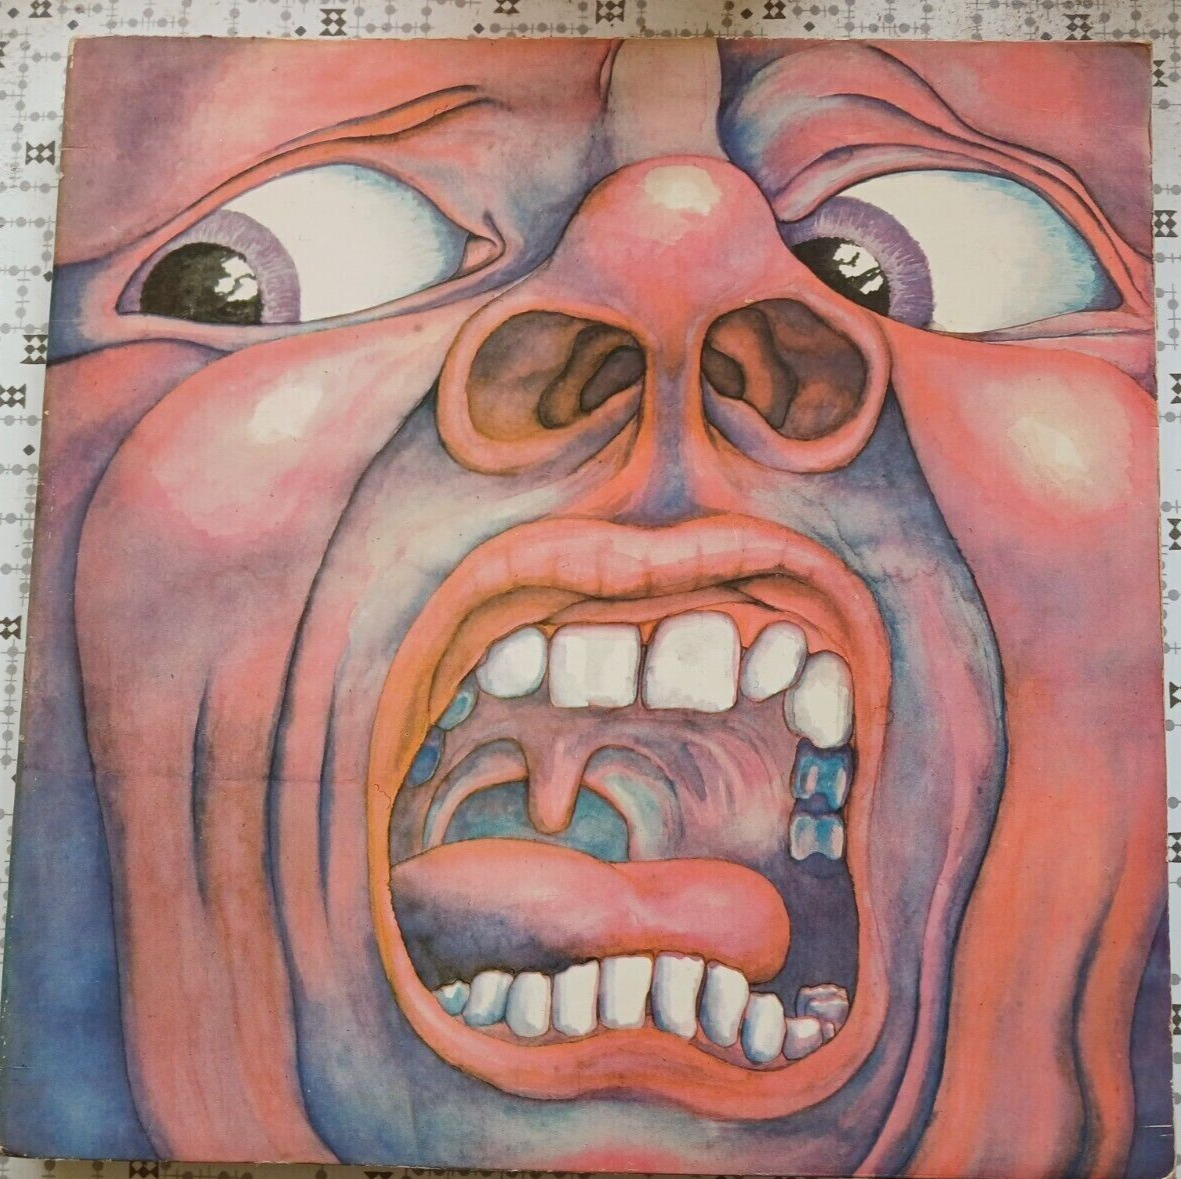 King Crimson In The Court Of The Crimson King Lp 1st Issue [Ex-/Vg+]Great Press